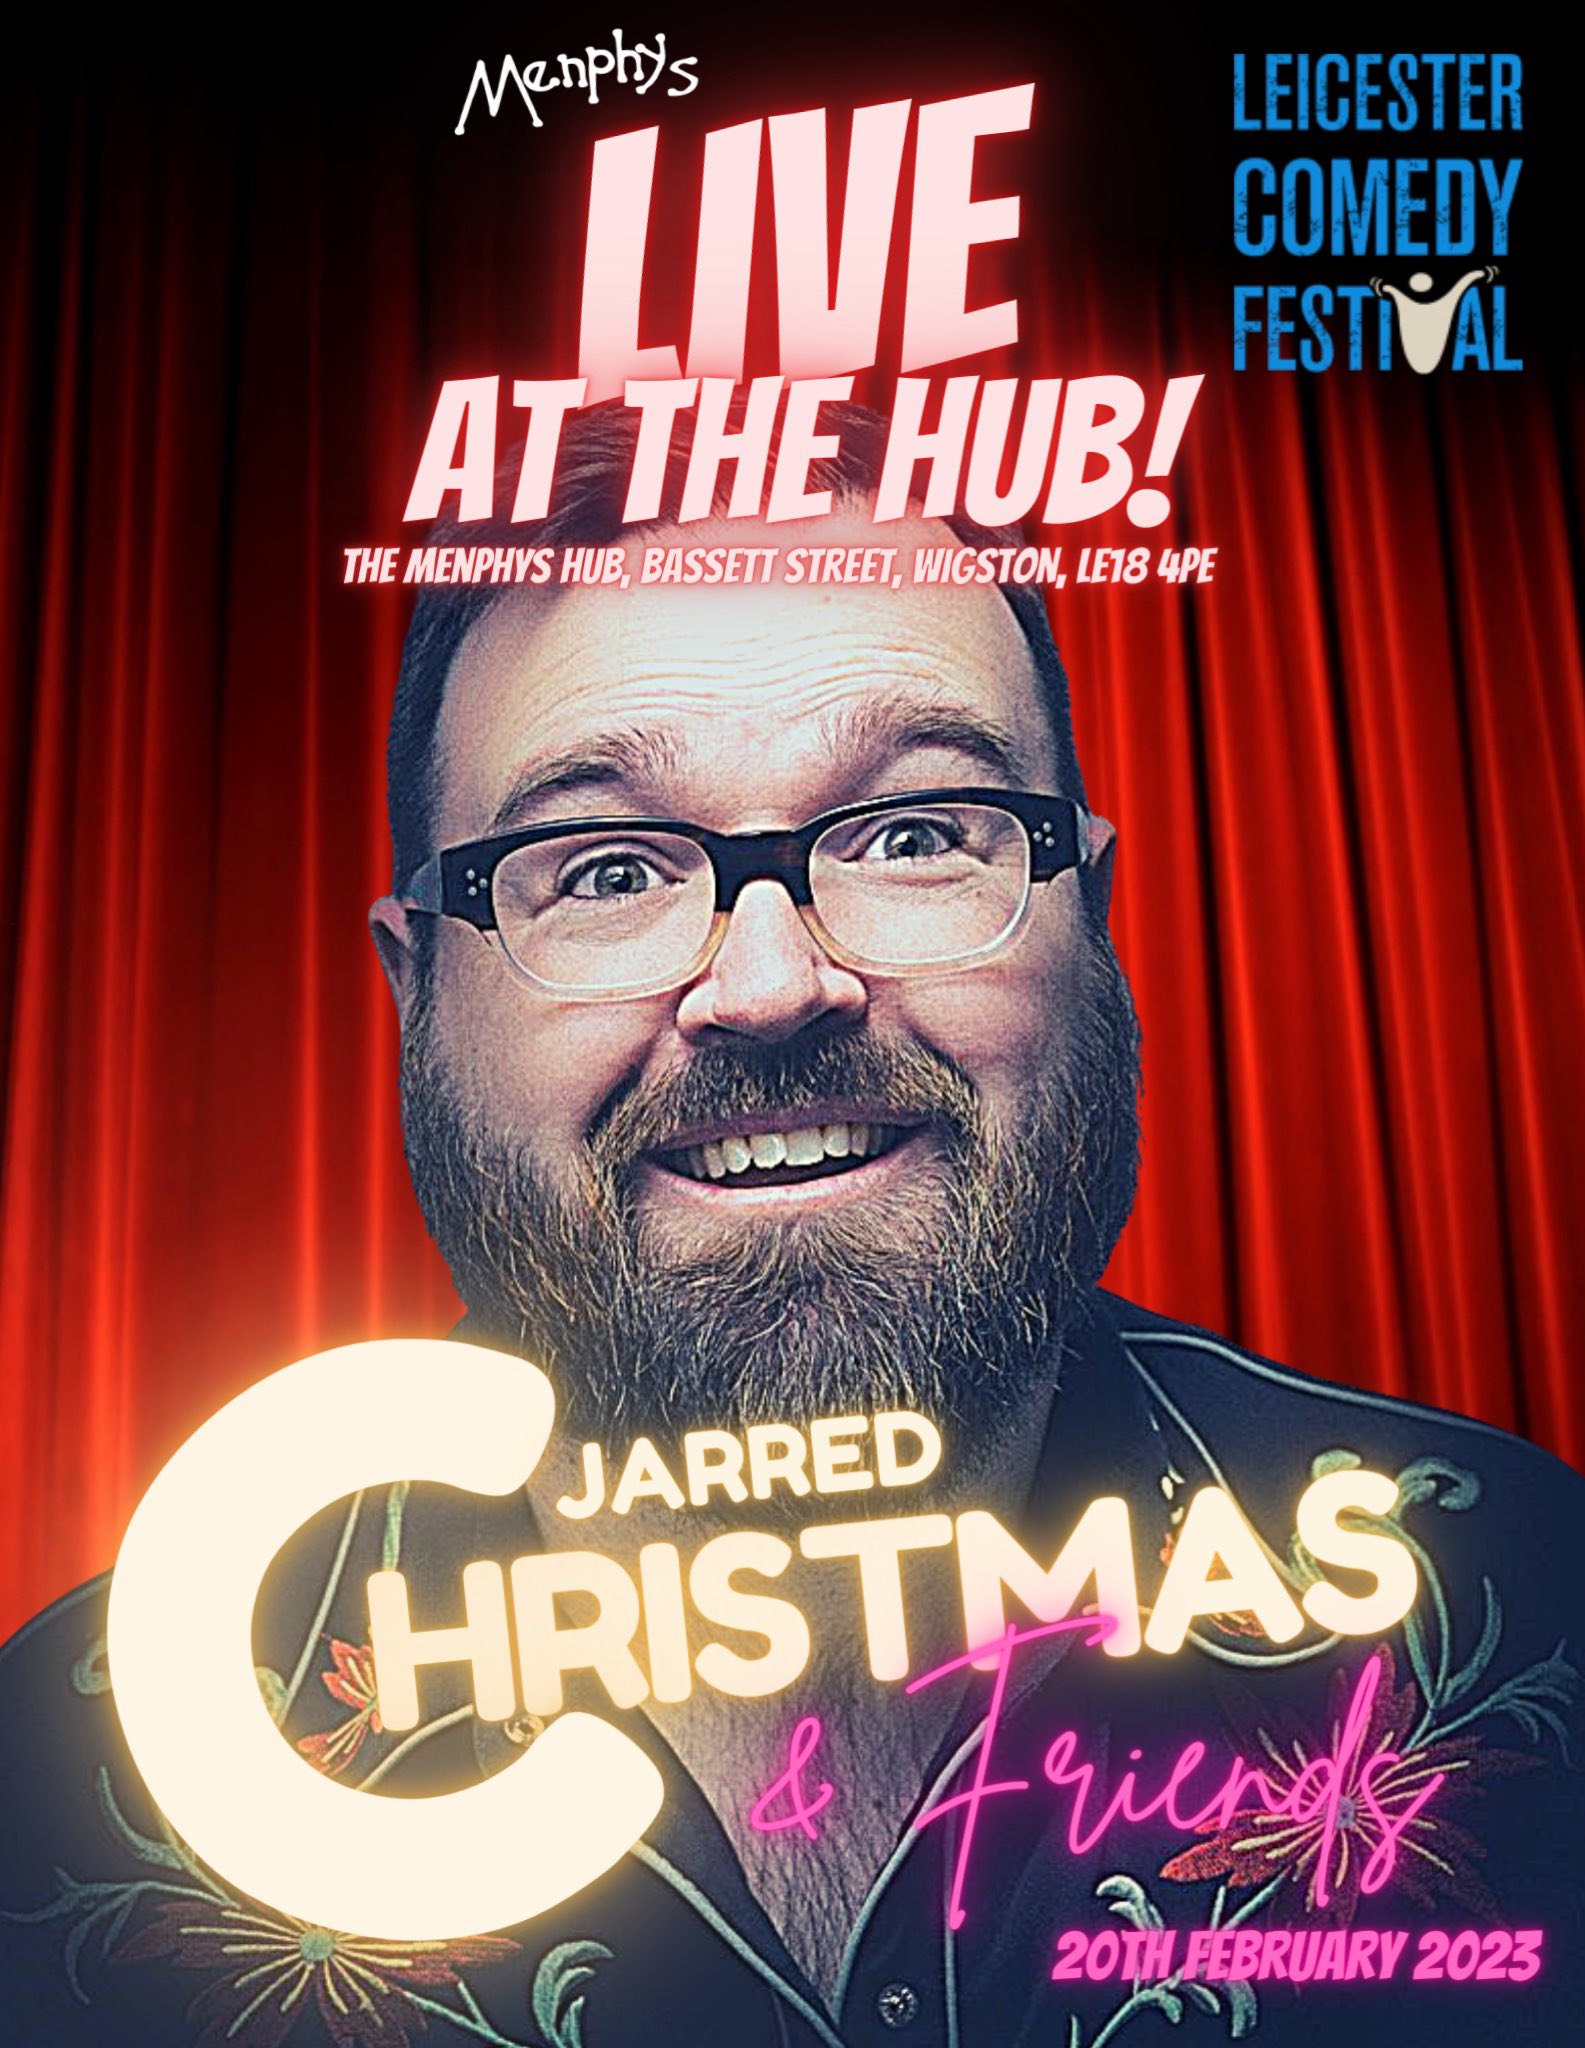 Jarred Christmas & Friends – Live at the HUB!